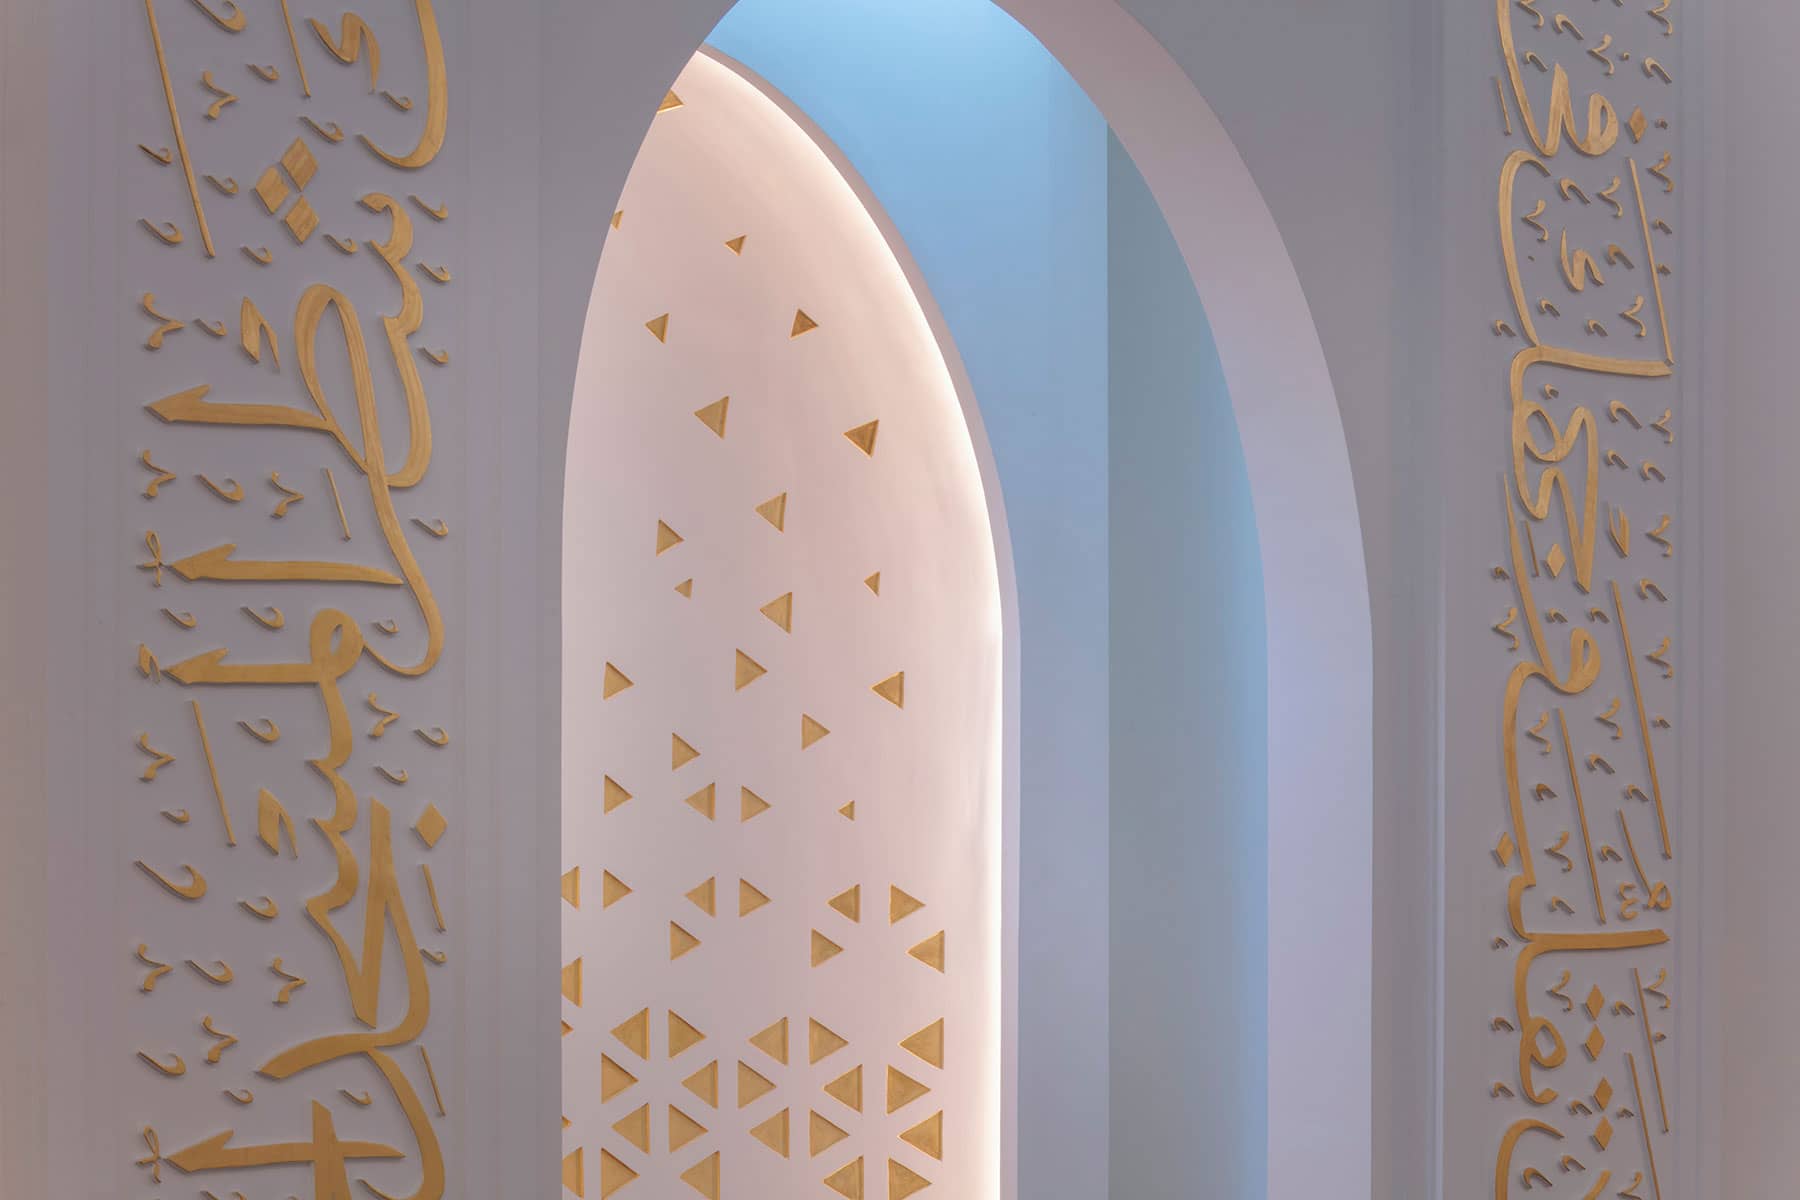 Architecture Photography Dubai: Calligraphy and arch detail of Mosque of light, Dubai, UAE.